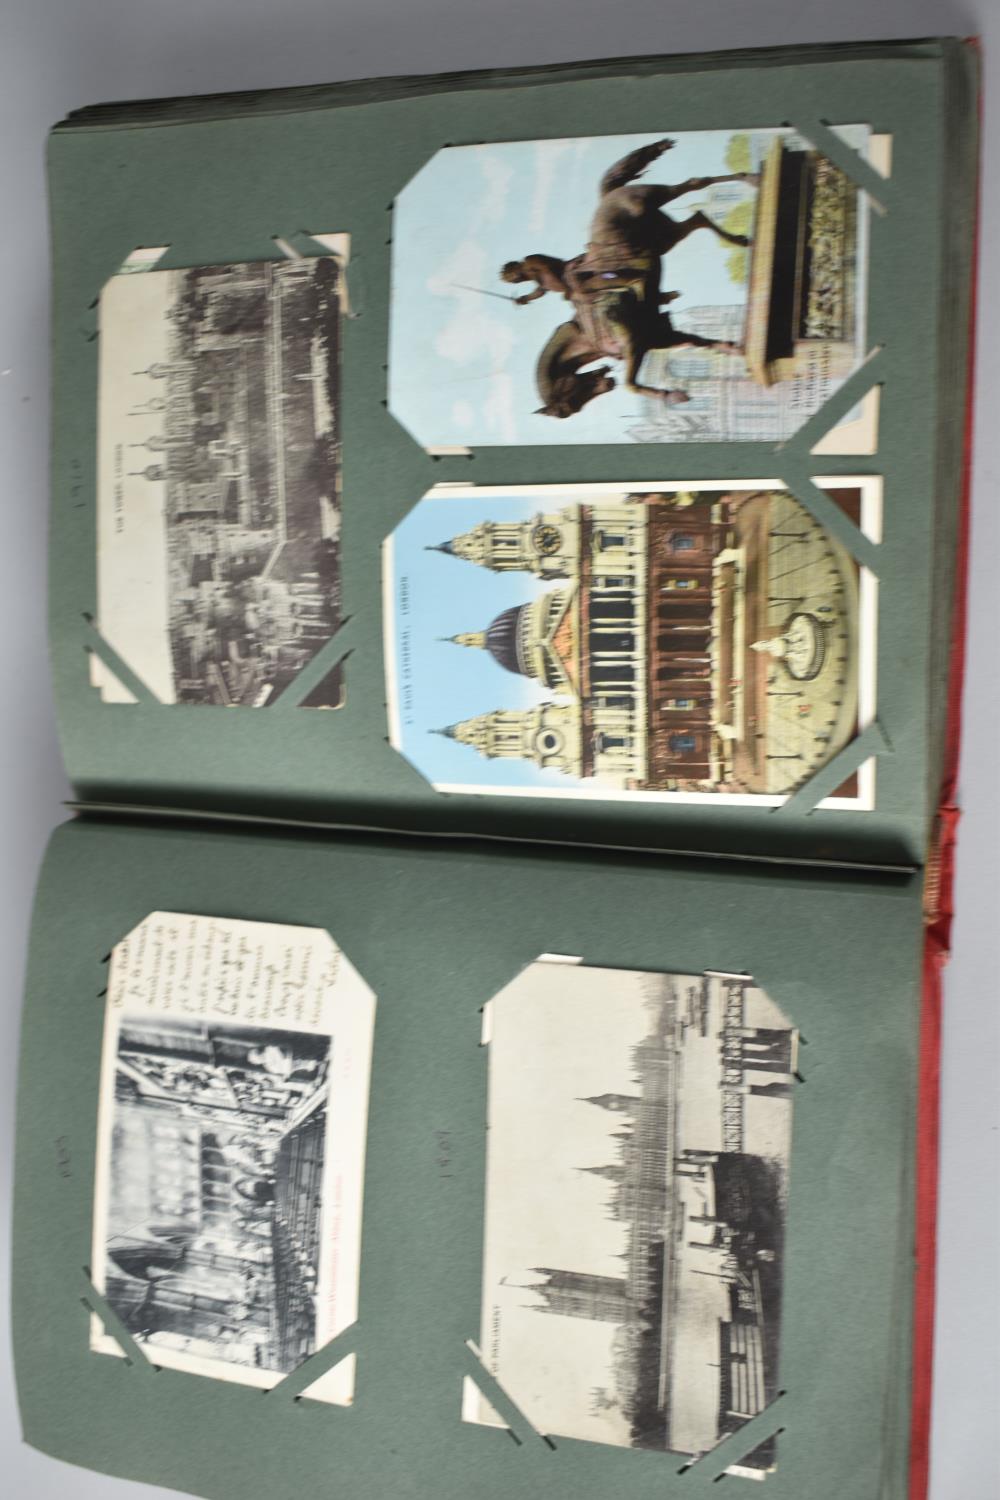 An Edwardian Postcard Album Containing Postcards of London, 290 Plus Cards - Image 4 of 7